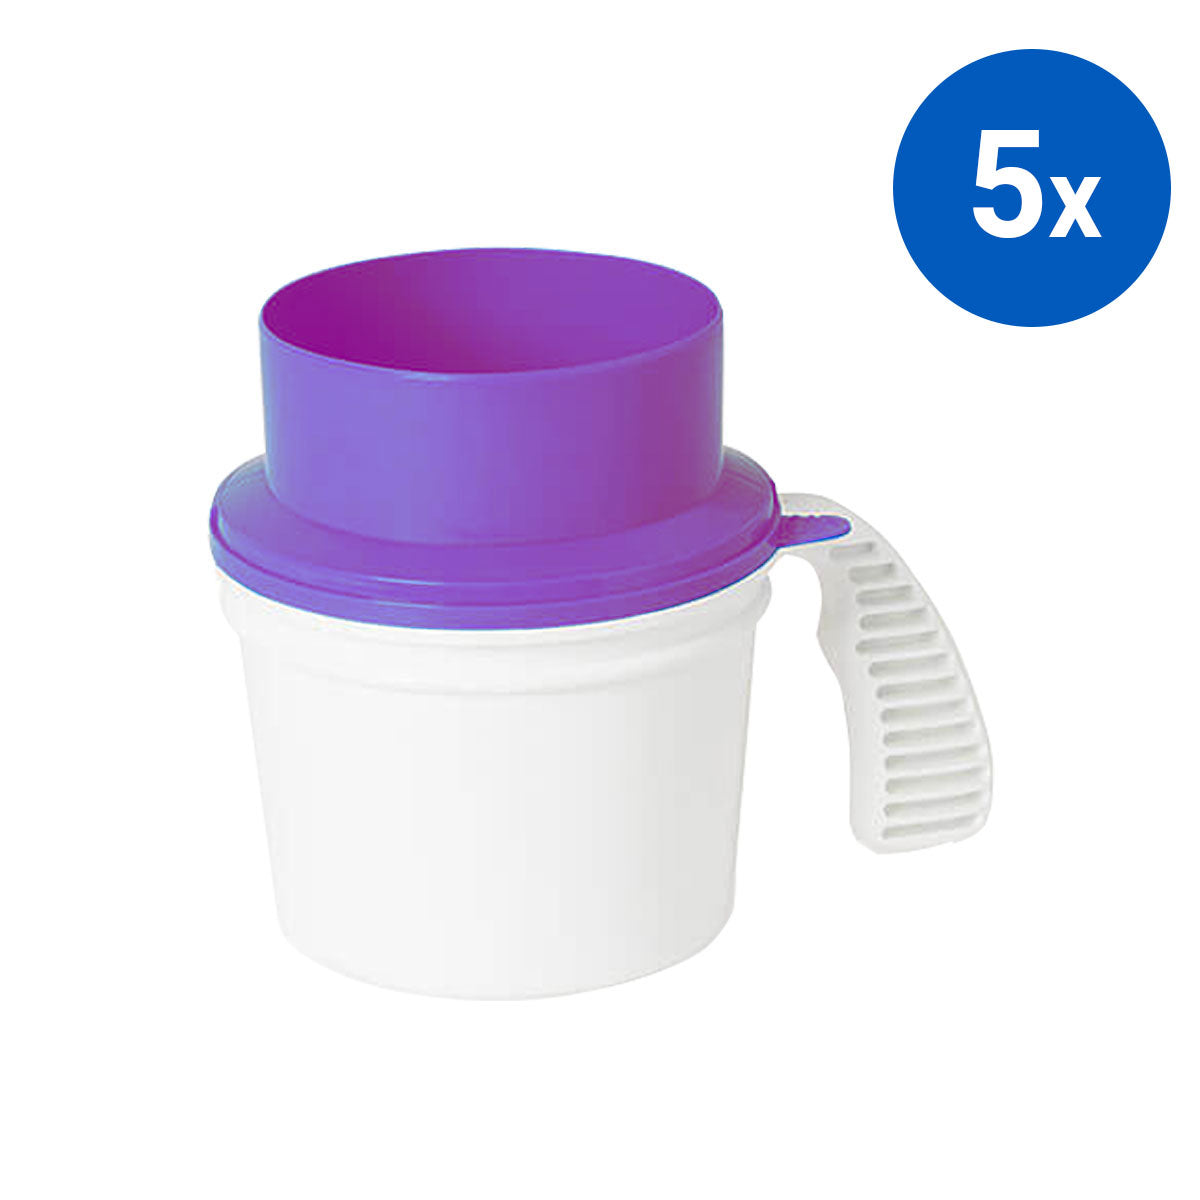 5x Collection Container Base and Quick Drop Lid - Purple